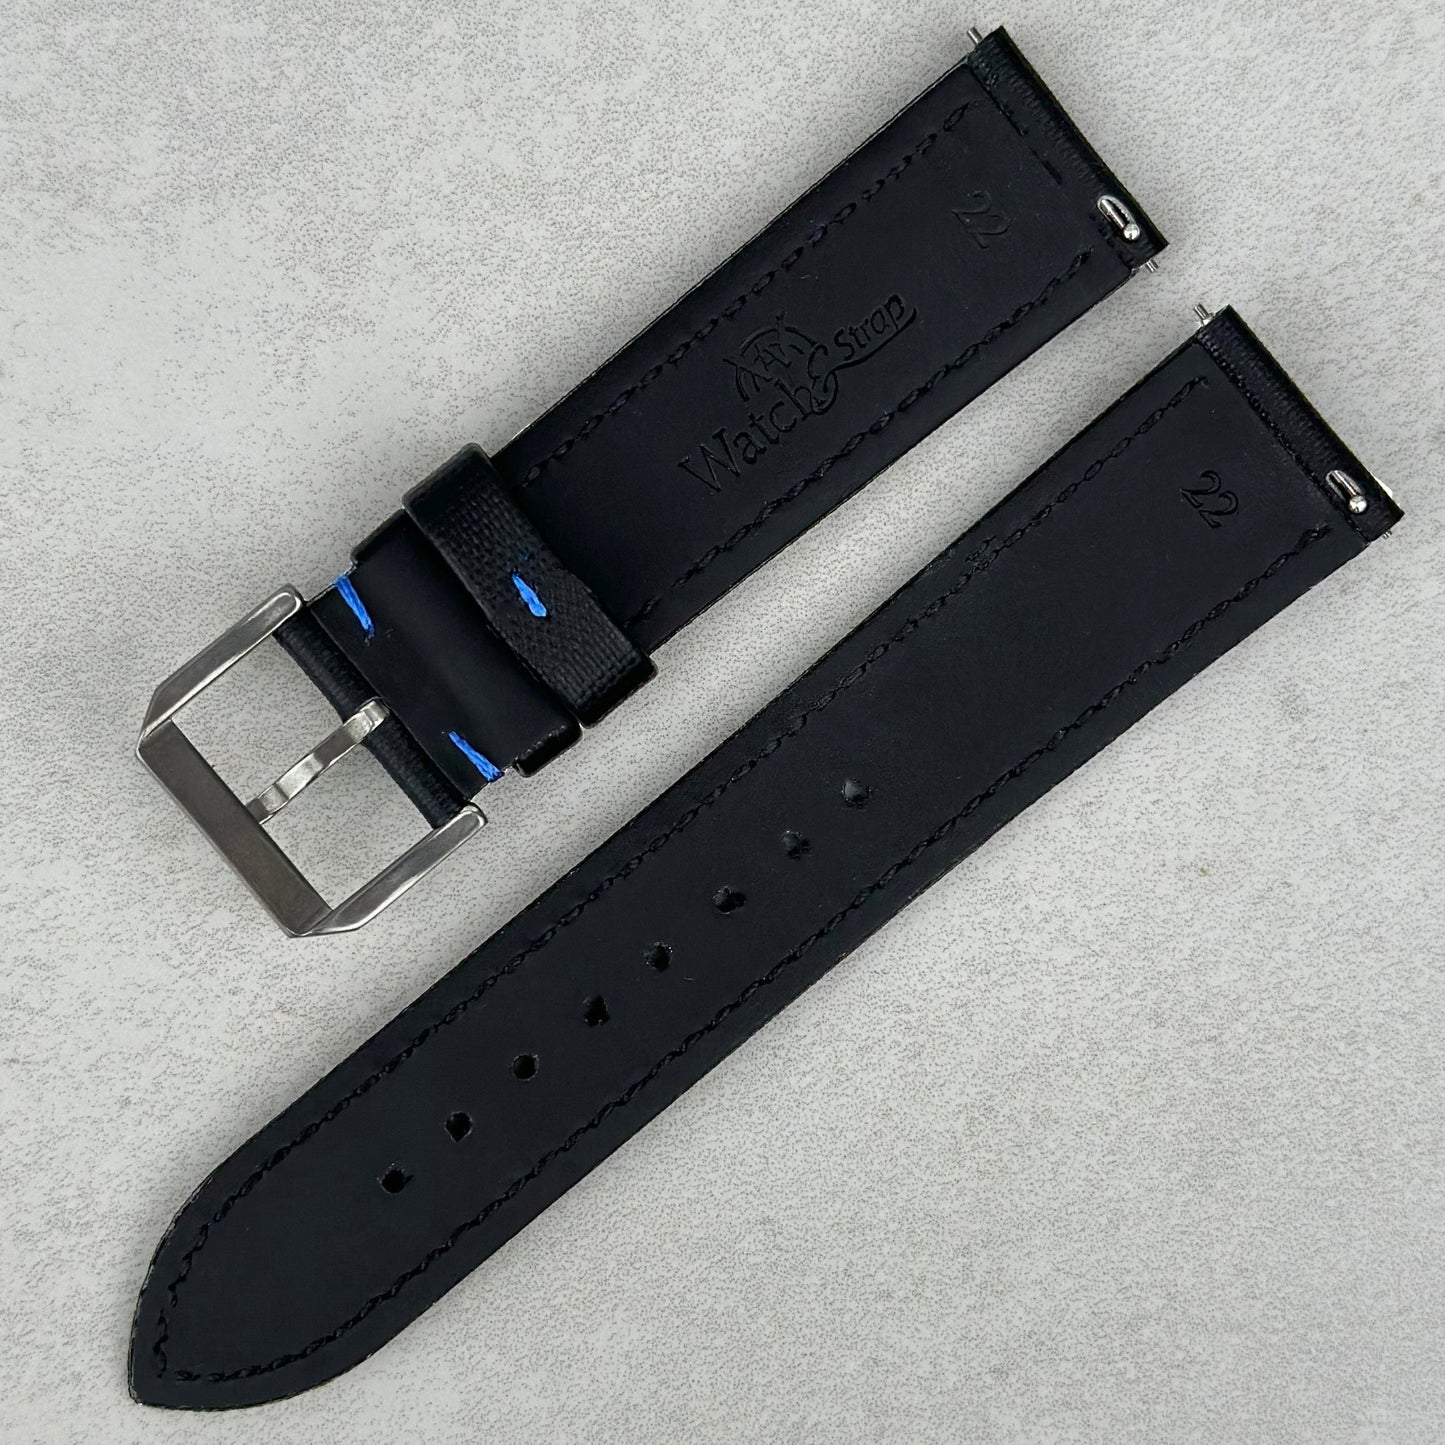 Rear of the Bermuda jet black sail cloth watch strap. Black leather. Quick release pins. Watch And Strap